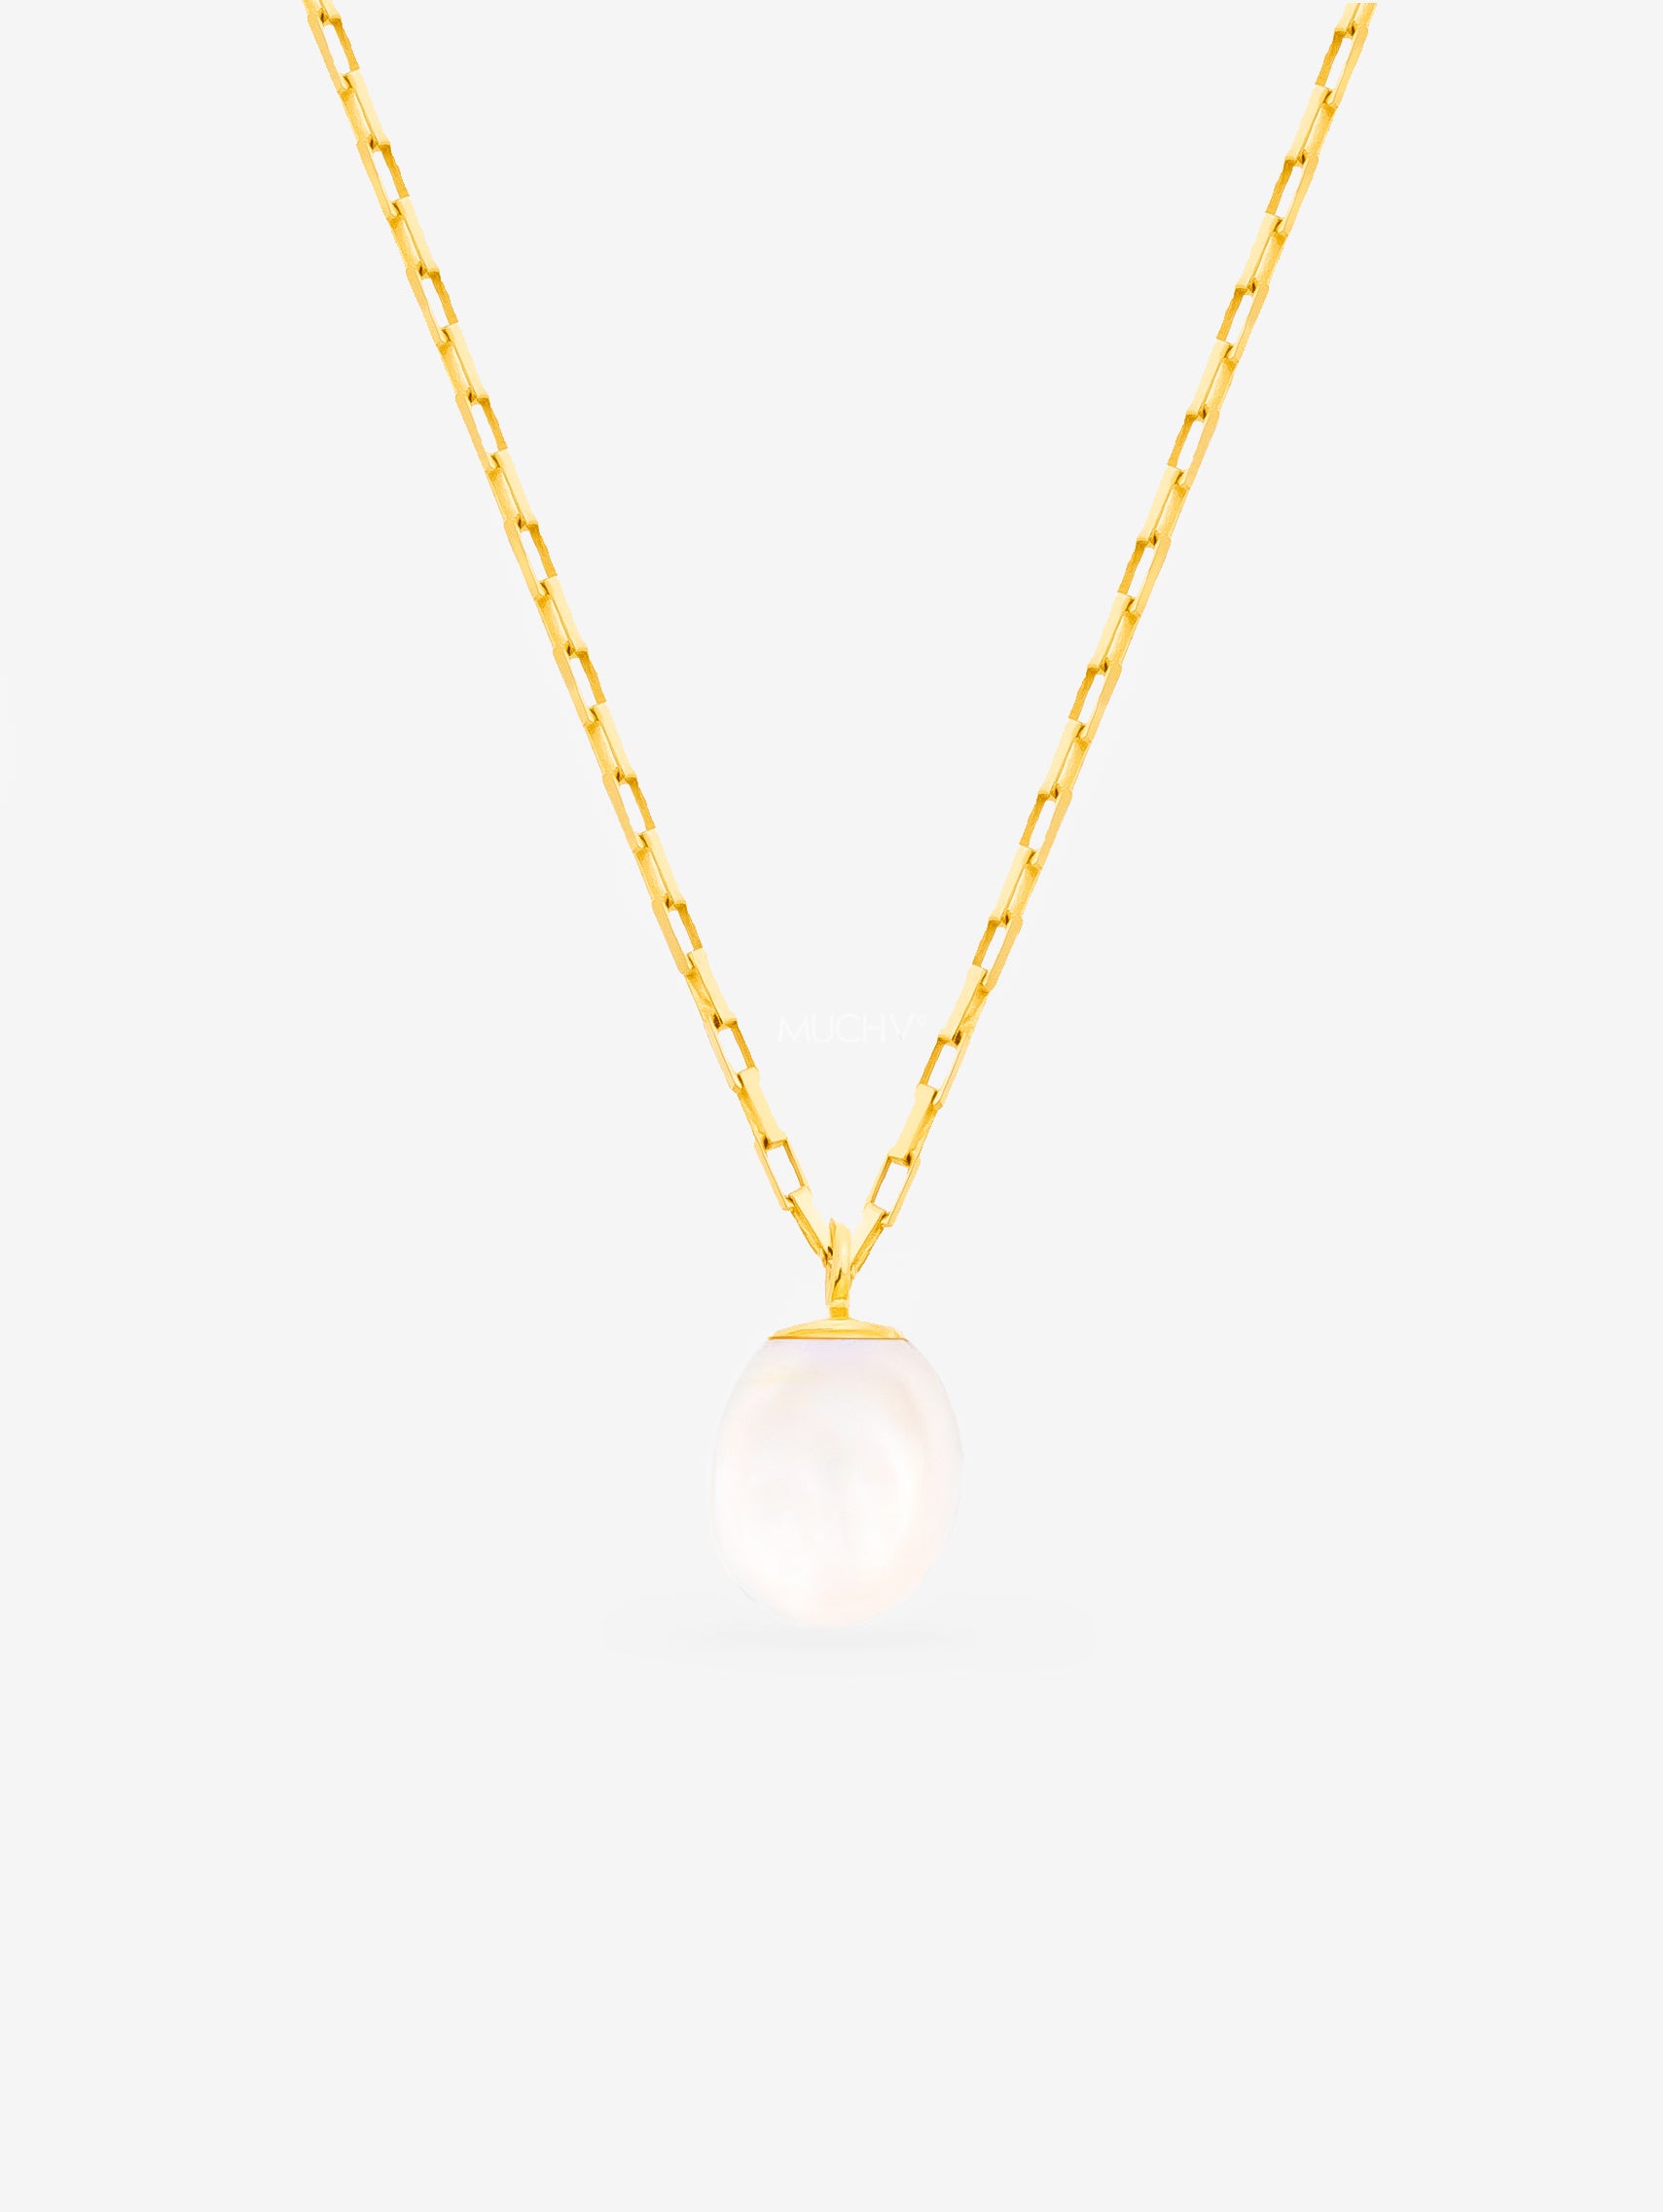 Gold Freshwater Pearl Necklace With Box Chain